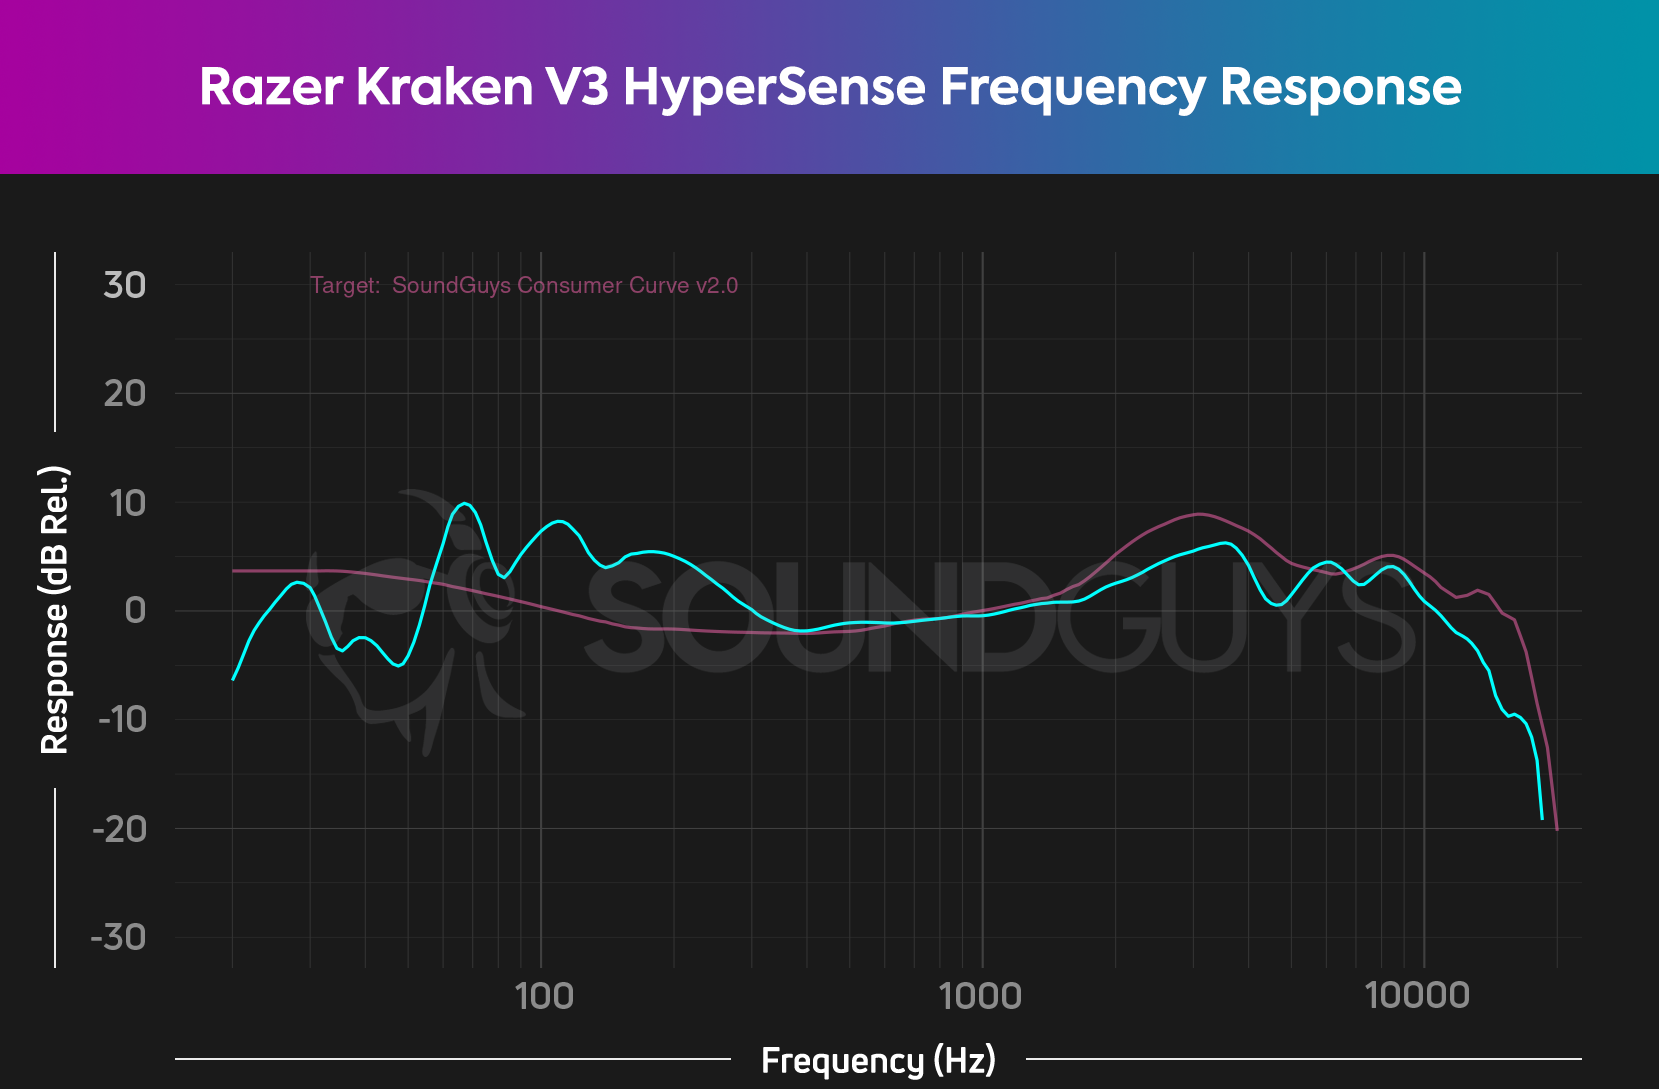 The frequency response chart for the Razer Kraken V3 HyperSense(cyan) compared to our consumer curve V2 (pink).